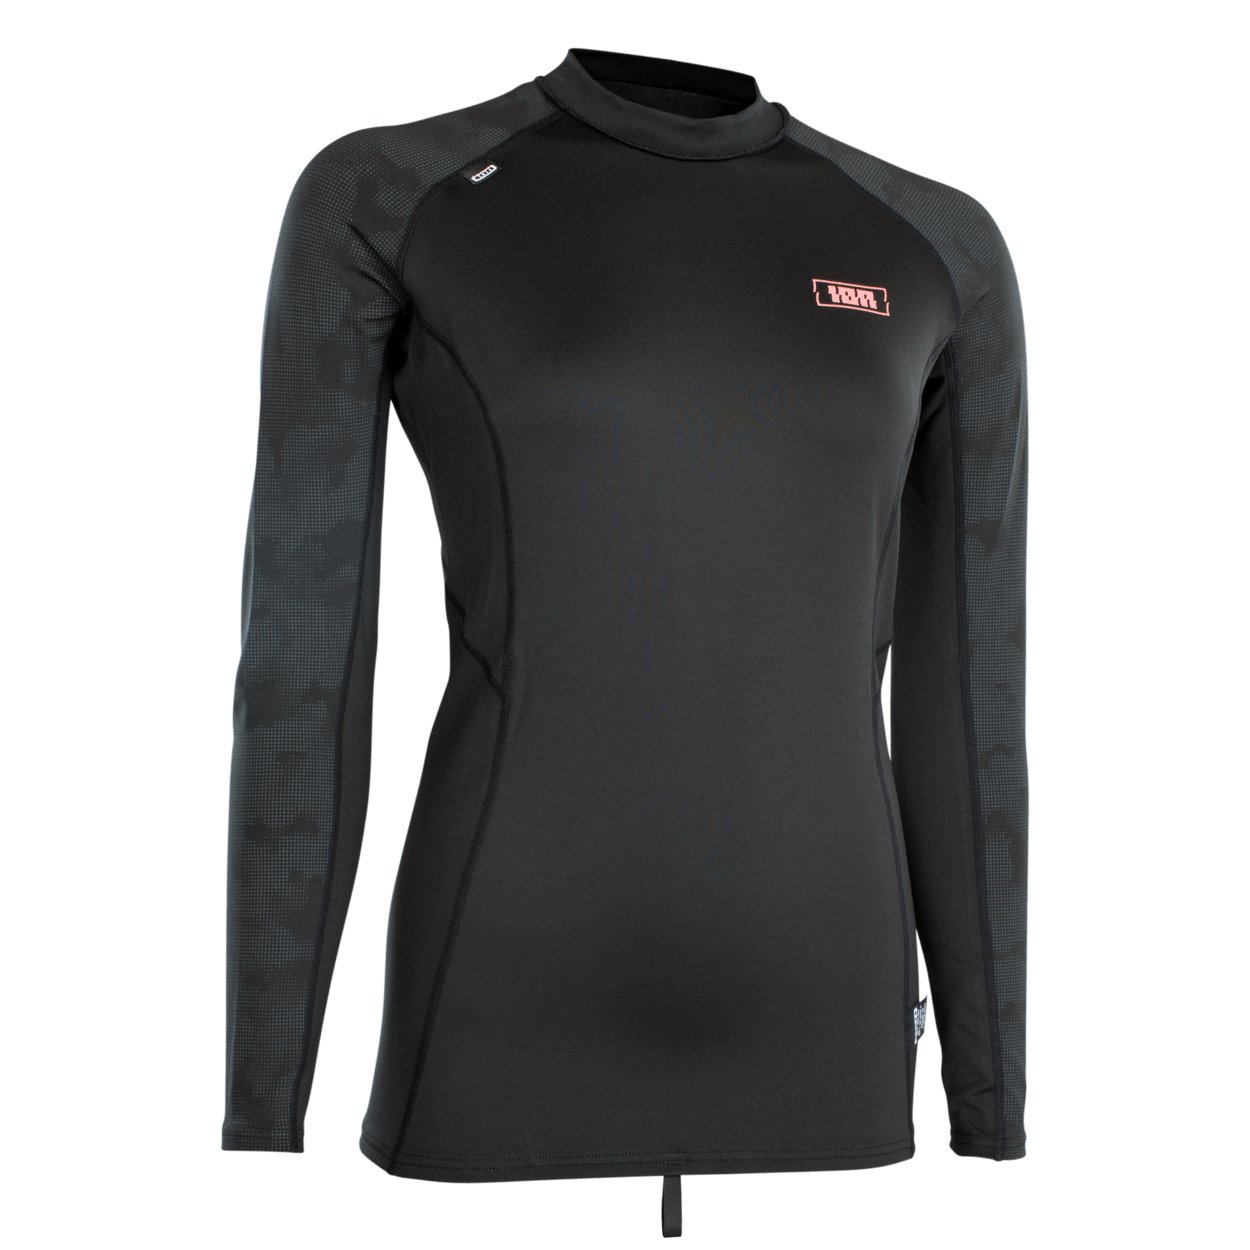 ION Thermo Top LS women 2022 - Worthing Watersports - 9008415878000 - Tops - ION Water